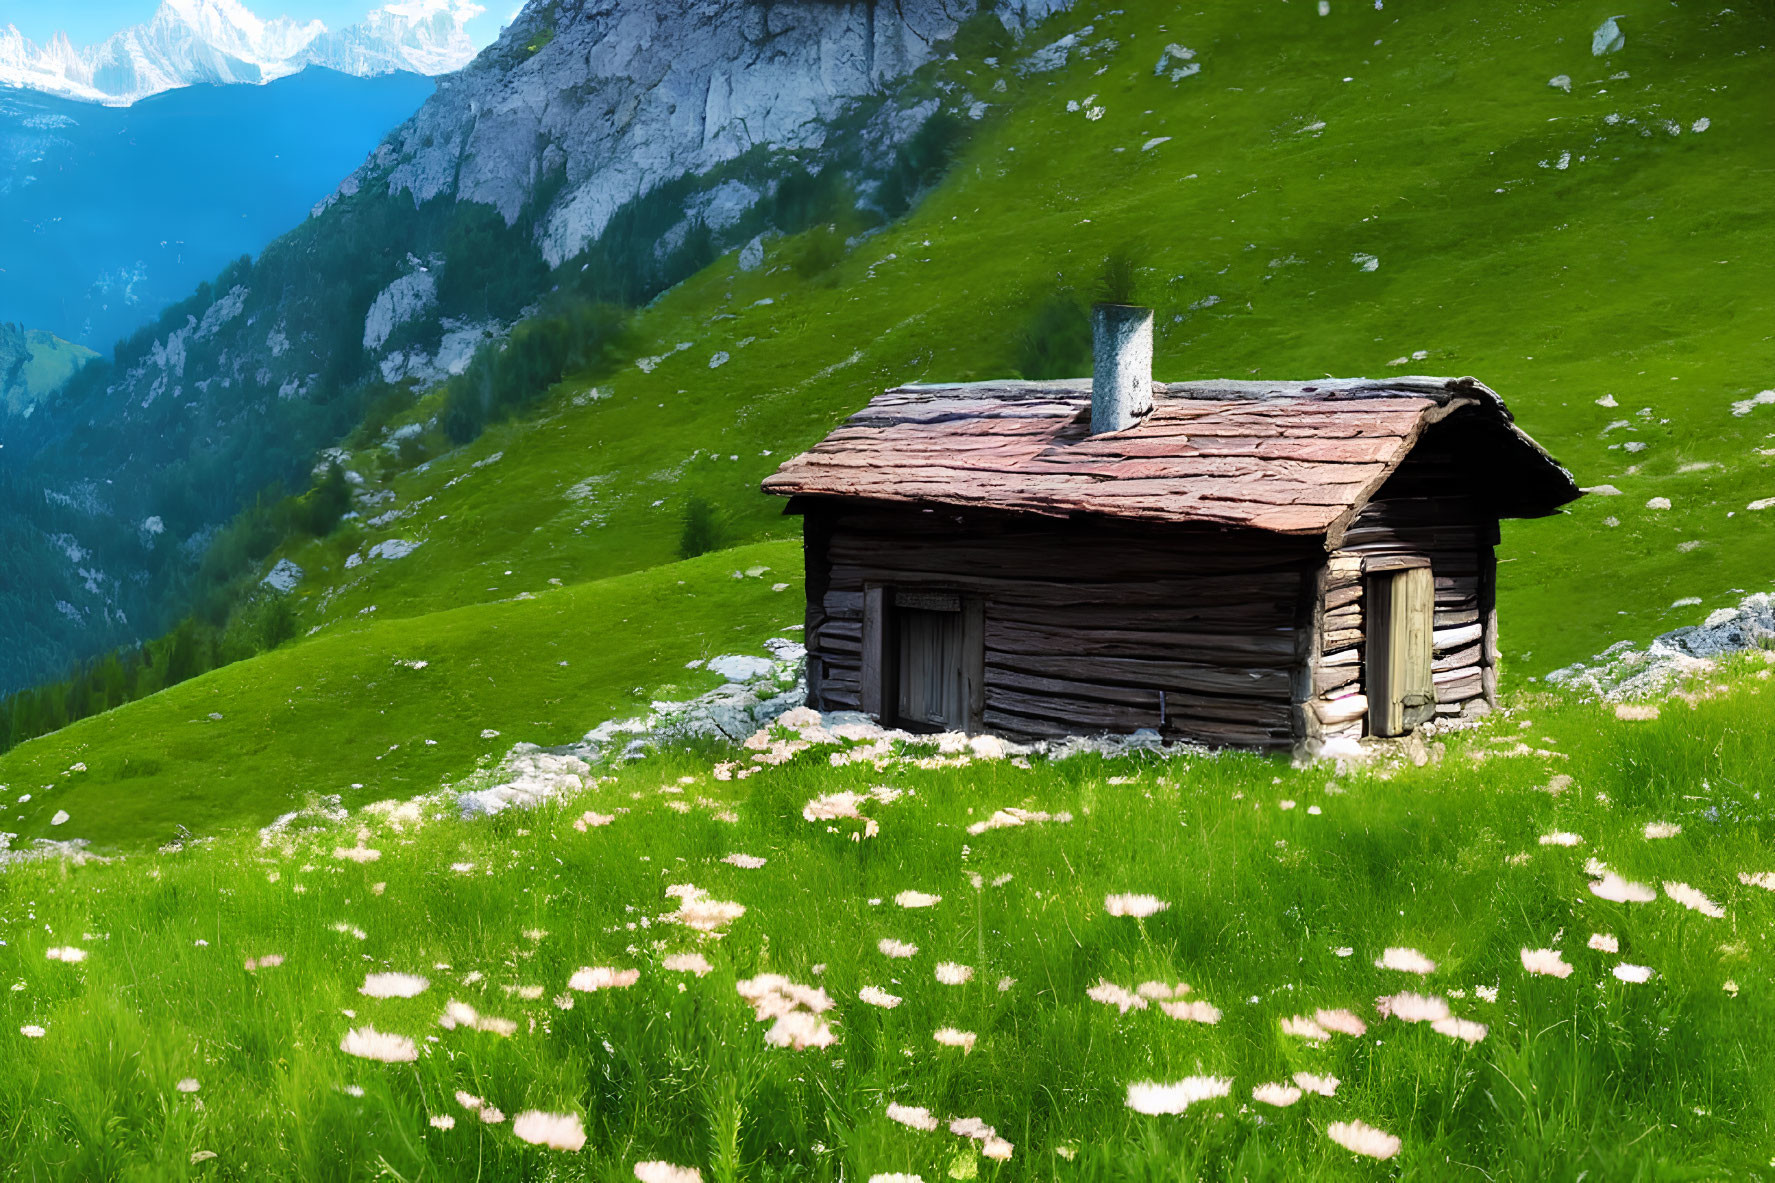 Rustic wooden cabin in lush meadow with alpine mountains & white flowers